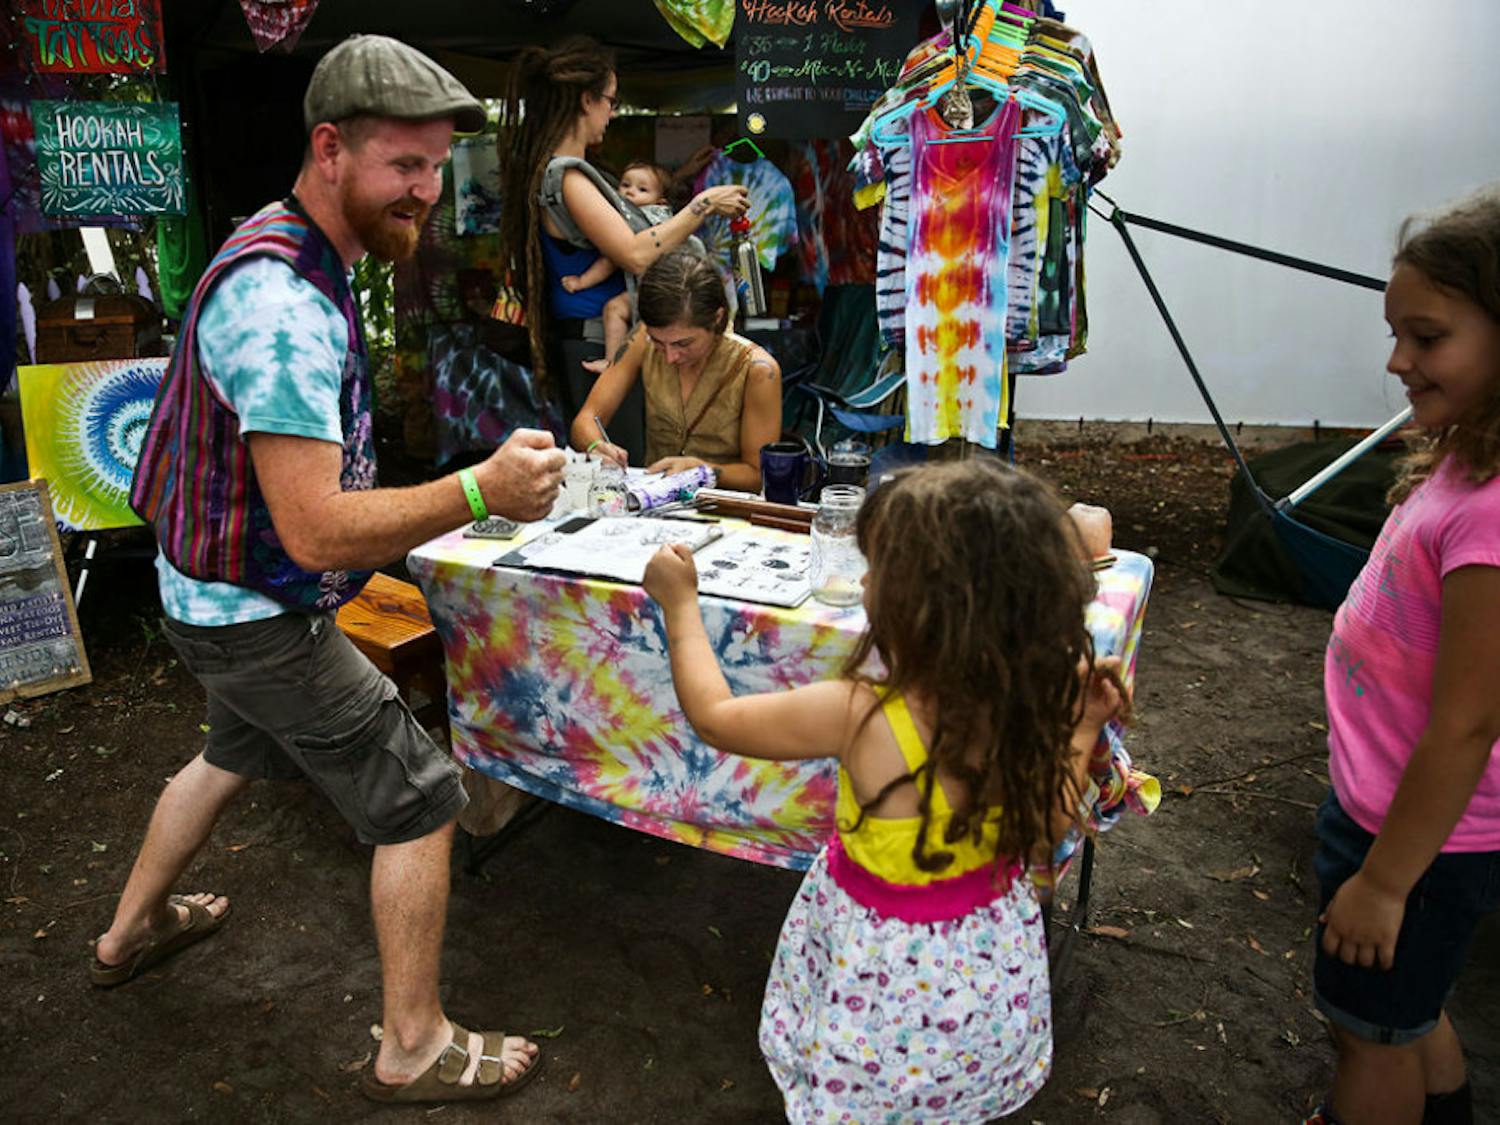 Sean Duncan, a 28-year-old Gypsy Paradise &amp; Friends artist, practices a fist bump with Ileana Rodriguez, 4, during Spirit Fest at The Jam on Sunday. The three-day festival featured more than 30 live music acts, as well as food, hand-made clothing and art to celebrate the venue's closing.